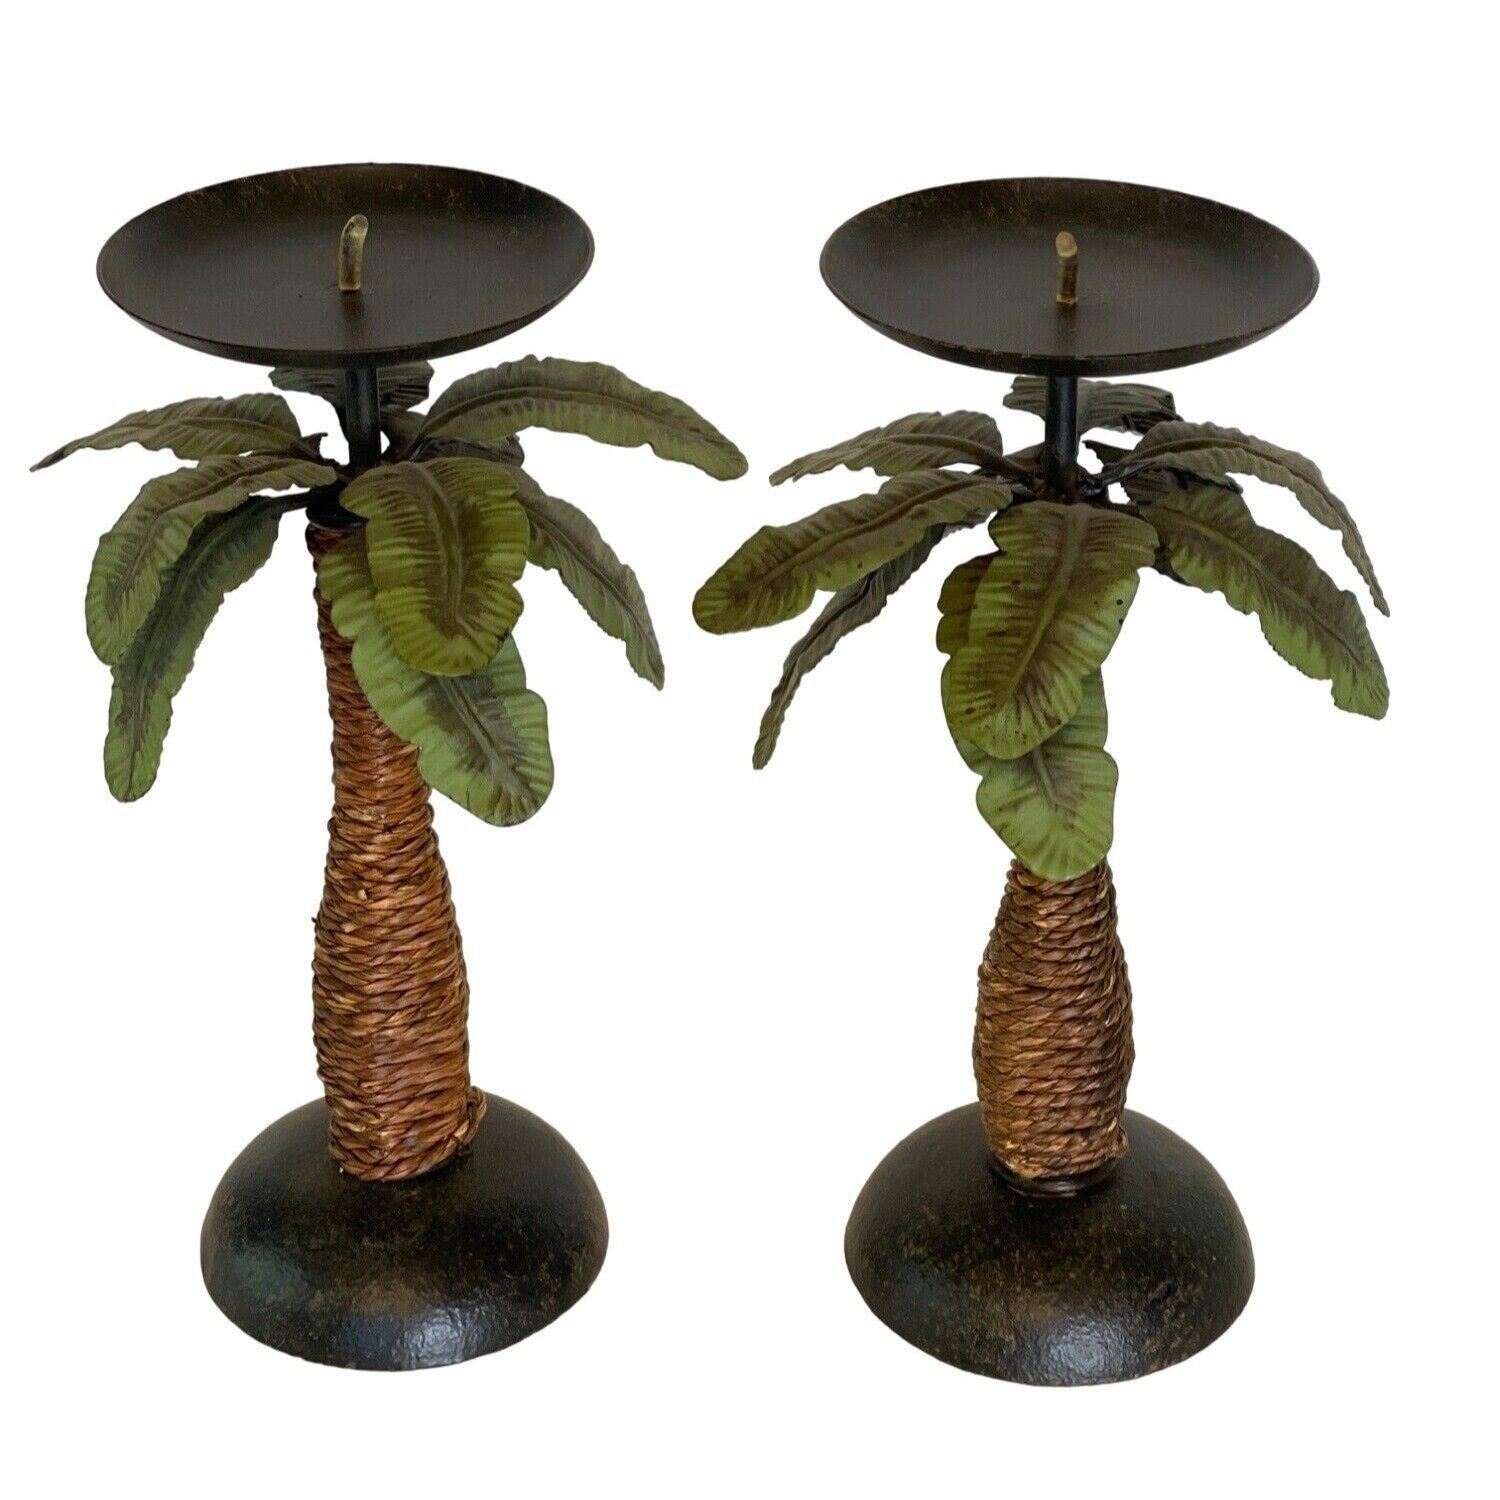 Palm Tree Pillar Candle Holder Stands Metal 10" x 6" Tropical Decor Set of 2 - $37.40